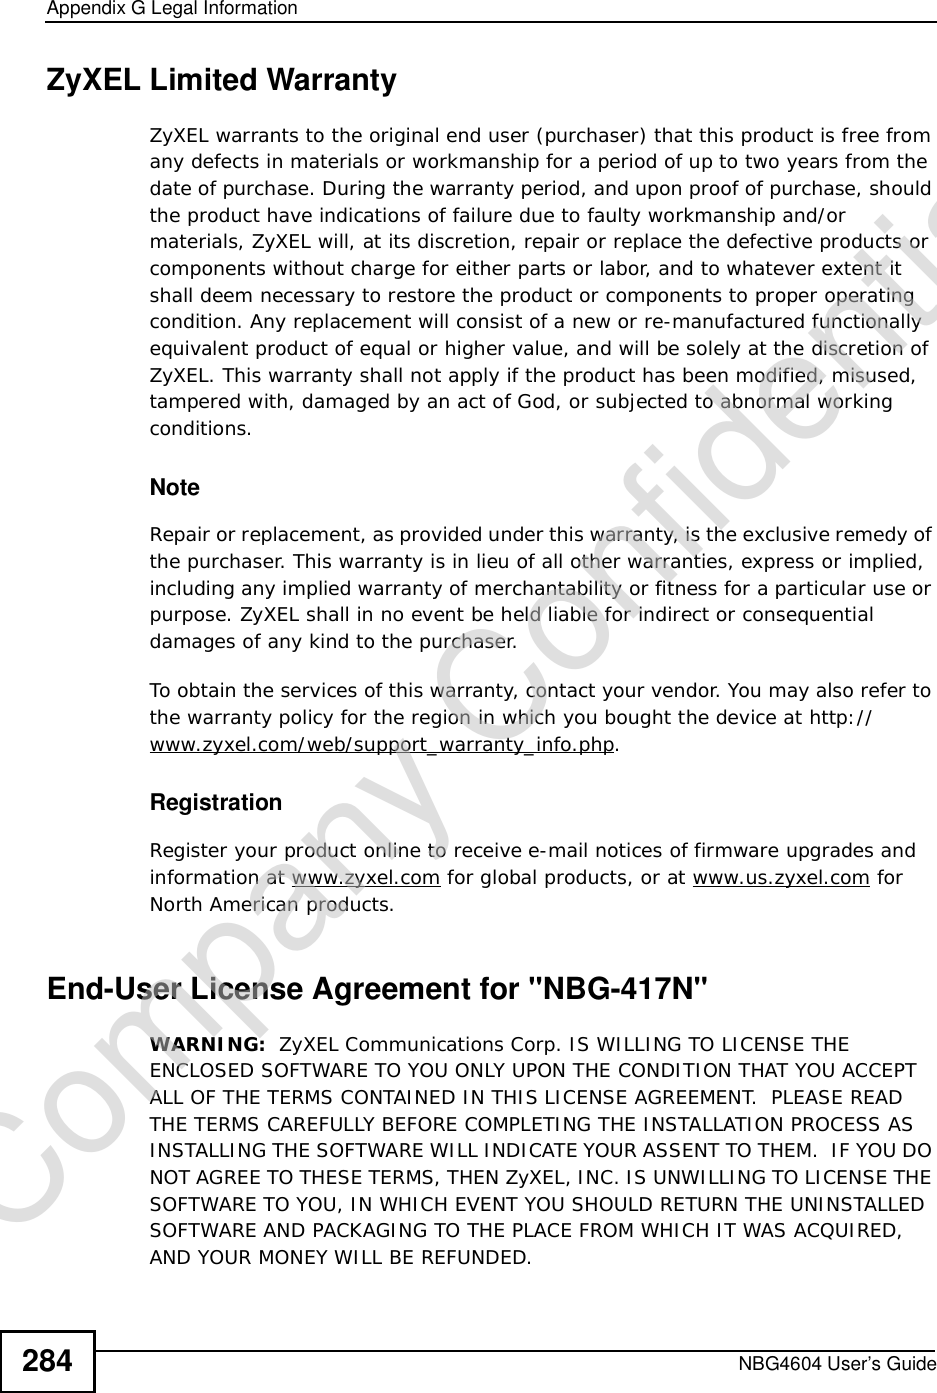 Appendix GLegal InformationNBG4604 User’s Guide284ZyXEL Limited WarrantyZyXEL warrants to the original end user (purchaser) that this product is free from any defects in materials or workmanship for a period of up to two years from the date of purchase. During the warranty period, and upon proof of purchase, should the product have indications of failure due to faulty workmanship and/or materials, ZyXEL will, at its discretion, repair or replace the defective products or components without charge for either parts or labor, and to whatever extent it shall deem necessary to restore the product or components to proper operating condition. Any replacement will consist of a new or re-manufactured functionally equivalent product of equal or higher value, and will be solely at the discretion of ZyXEL. This warranty shall not apply if the product has been modified, misused, tampered with, damaged by an act of God, or subjected to abnormal working conditions.NoteRepair or replacement, as provided under this warranty, is the exclusive remedy of the purchaser. This warranty is in lieu of all other warranties, express or implied, including any implied warranty of merchantability or fitness for a particular use or purpose. ZyXEL shall in no event be held liable for indirect or consequential damages of any kind to the purchaser.To obtain the services of this warranty, contact your vendor. You may also refer to the warranty policy for the region in which you bought the device at http://www.zyxel.com/web/support_warranty_info.php.RegistrationRegister your product online to receive e-mail notices of firmware upgrades and information at www.zyxel.com for global products, or at www.us.zyxel.com for North American products.End-User License Agreement for &quot;NBG-417N&quot;WARNING:  ZyXEL Communications Corp. IS WILLING TO LICENSE THE ENCLOSED SOFTWARE TO YOU ONLY UPON THE CONDITION THAT YOU ACCEPT ALL OF THE TERMS CONTAINED IN THIS LICENSE AGREEMENT.  PLEASE READ THE TERMS CAREFULLY BEFORE COMPLETING THE INSTALLATION PROCESS AS INSTALLING THE SOFTWARE WILL INDICATE YOUR ASSENT TO THEM.  IF YOU DO NOT AGREE TO THESE TERMS, THEN ZyXEL, INC. IS UNWILLING TO LICENSE THE SOFTWARE TO YOU, IN WHICH EVENT YOU SHOULD RETURN THE UNINSTALLED SOFTWARE AND PACKAGING TO THE PLACE FROM WHICH IT WAS ACQUIRED, AND YOUR MONEY WILL BE REFUNDED.Company Confidential